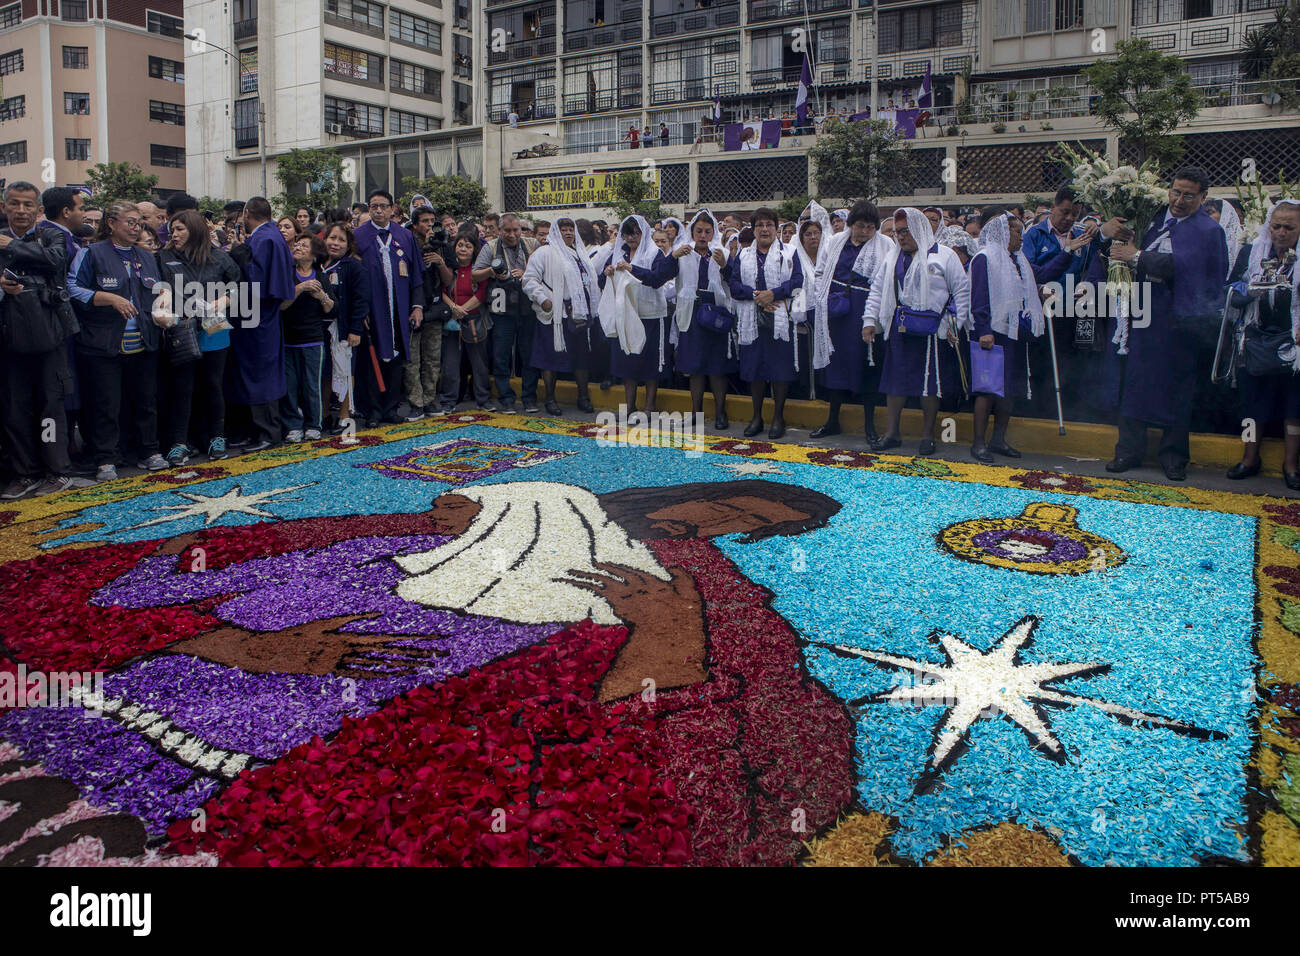 Lima, Peru. 6th Oct, 2018. Devotees making a carpet of flowers, outside the church where the image of the Lord of the Miracles will start the procession. Every October for the past four centuries this procession takes place in Lima and is known as the most important religious event in Peru. This Peruvian tradition commemorates the devastating 1746 Lima earthquake which left only a mural of Christ standing in a city area. Credit: Guillermo Gutierrez/SOPA Images/ZUMA Wire/Alamy Live News Stock Photo